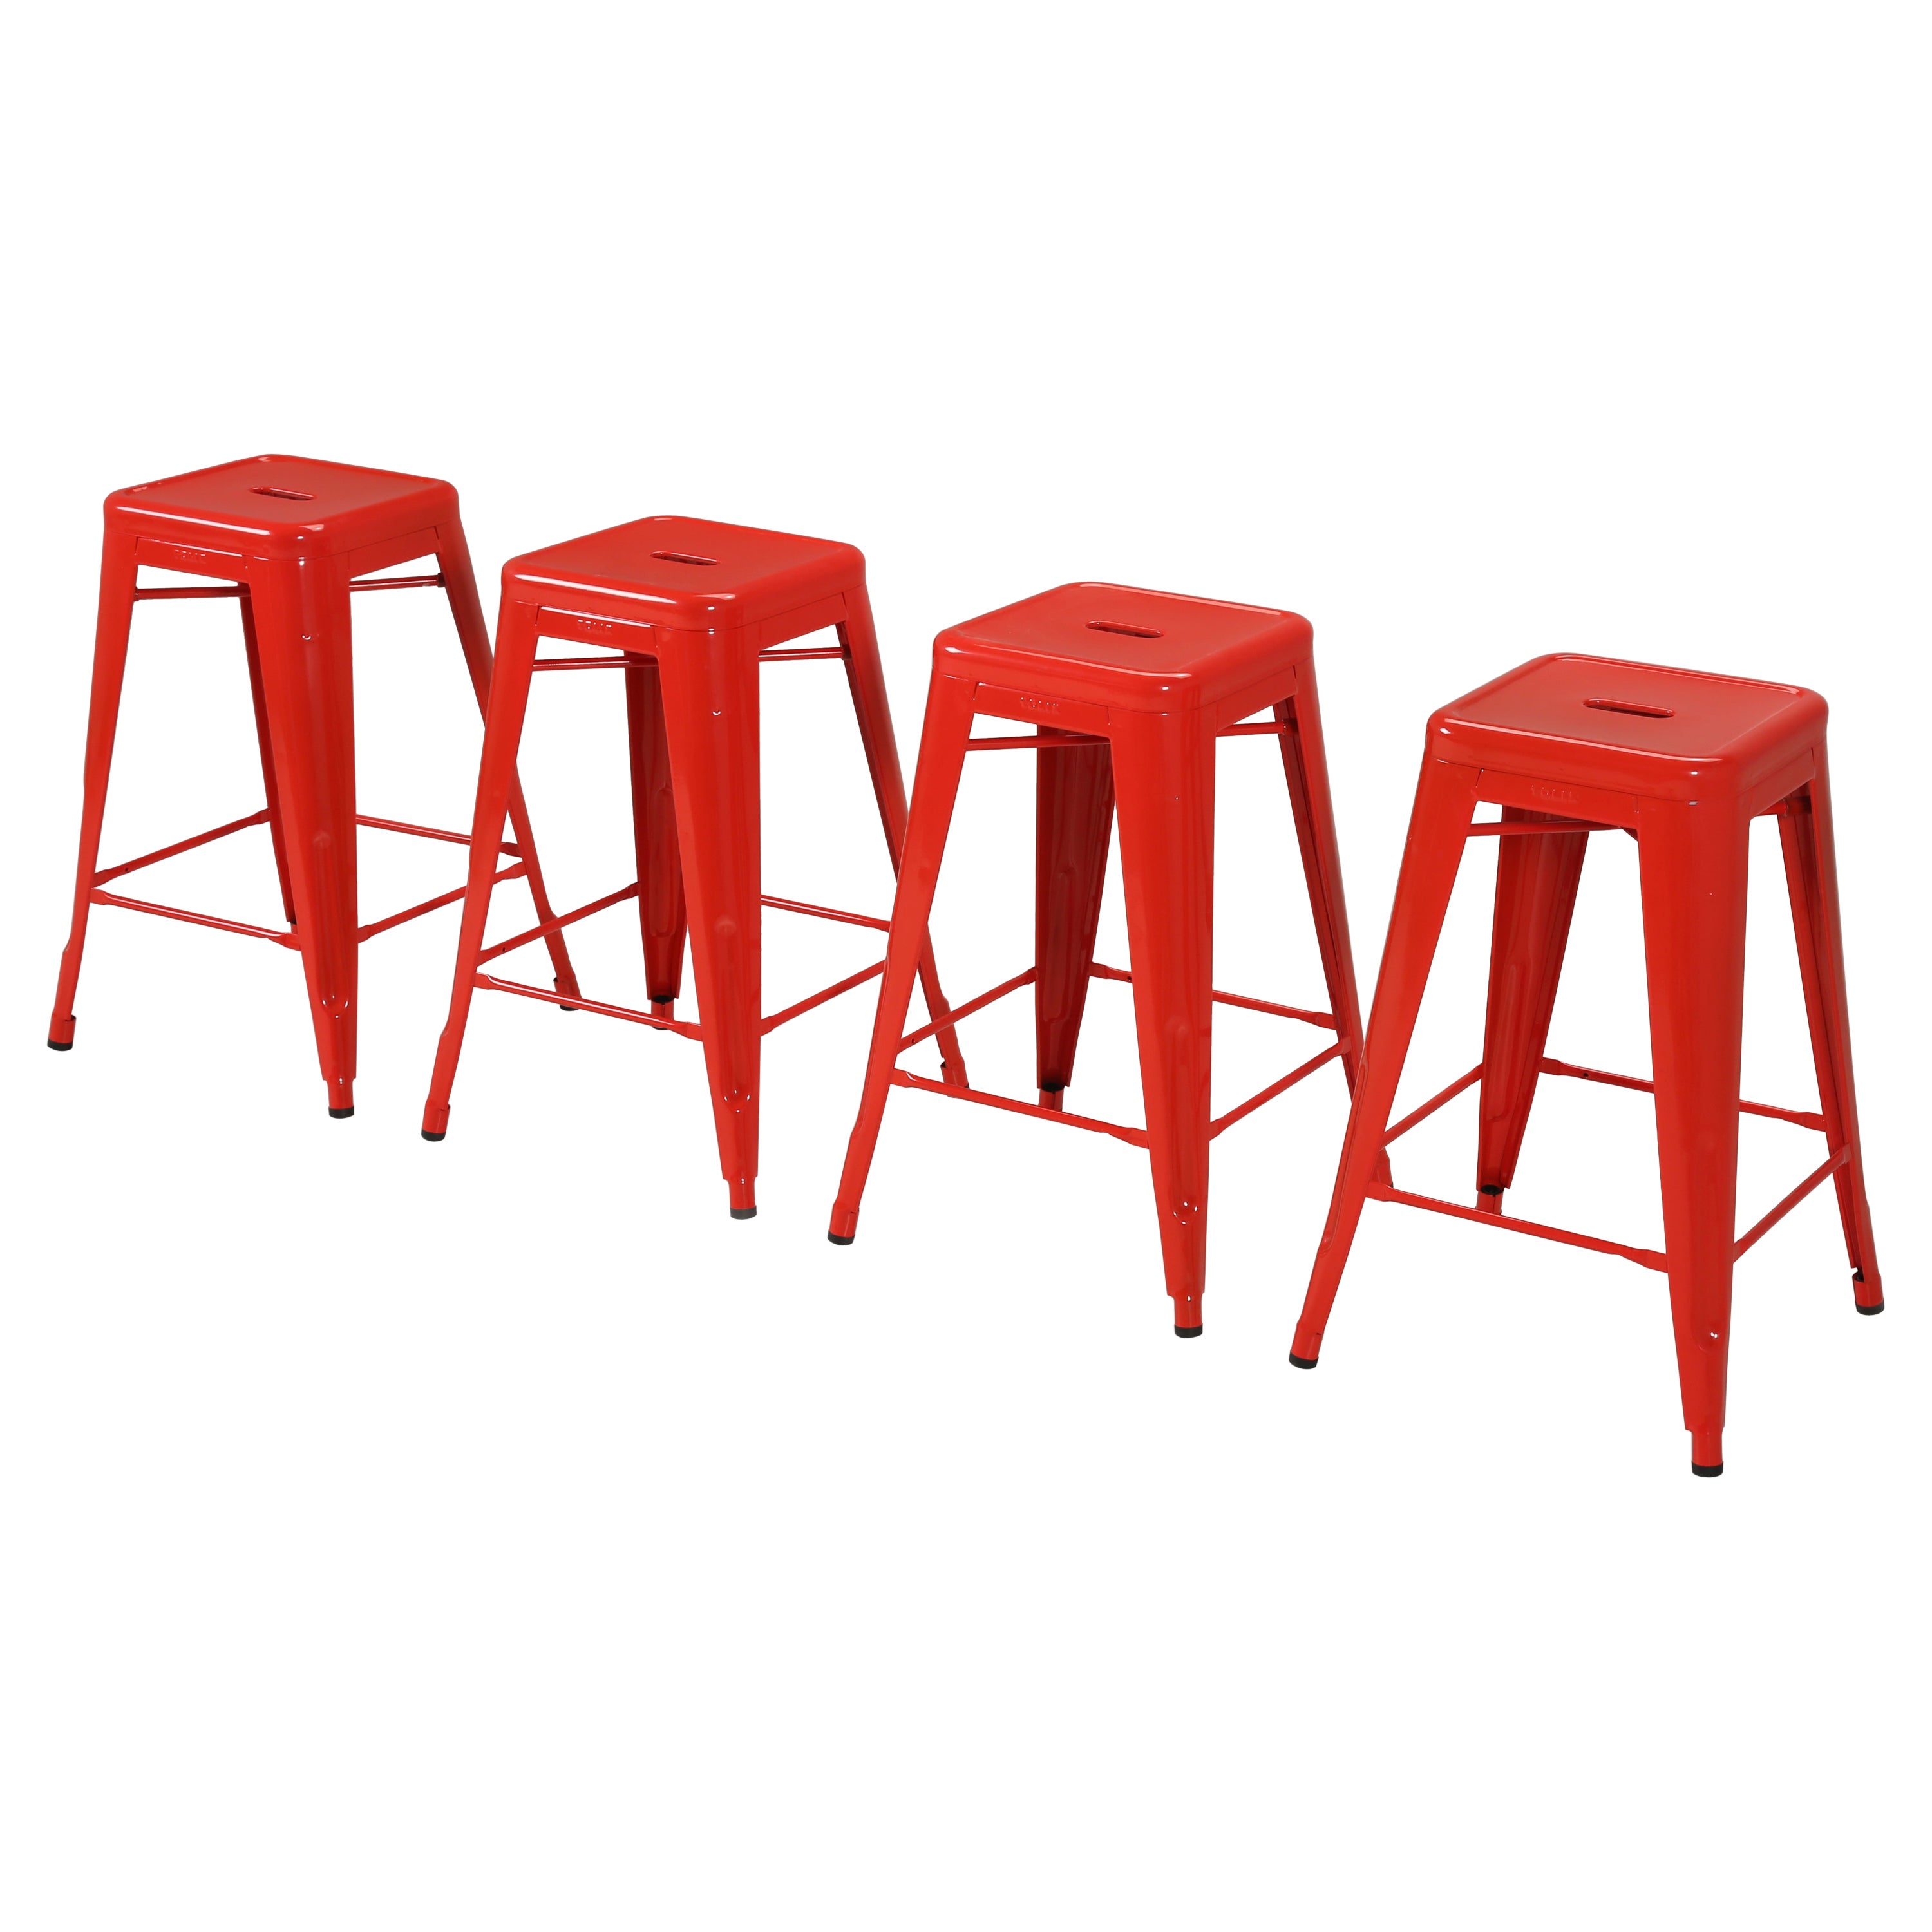 Genuine Tolix Stacking Stools 100's Showroom Samples to Choose from Most Colors For Sale